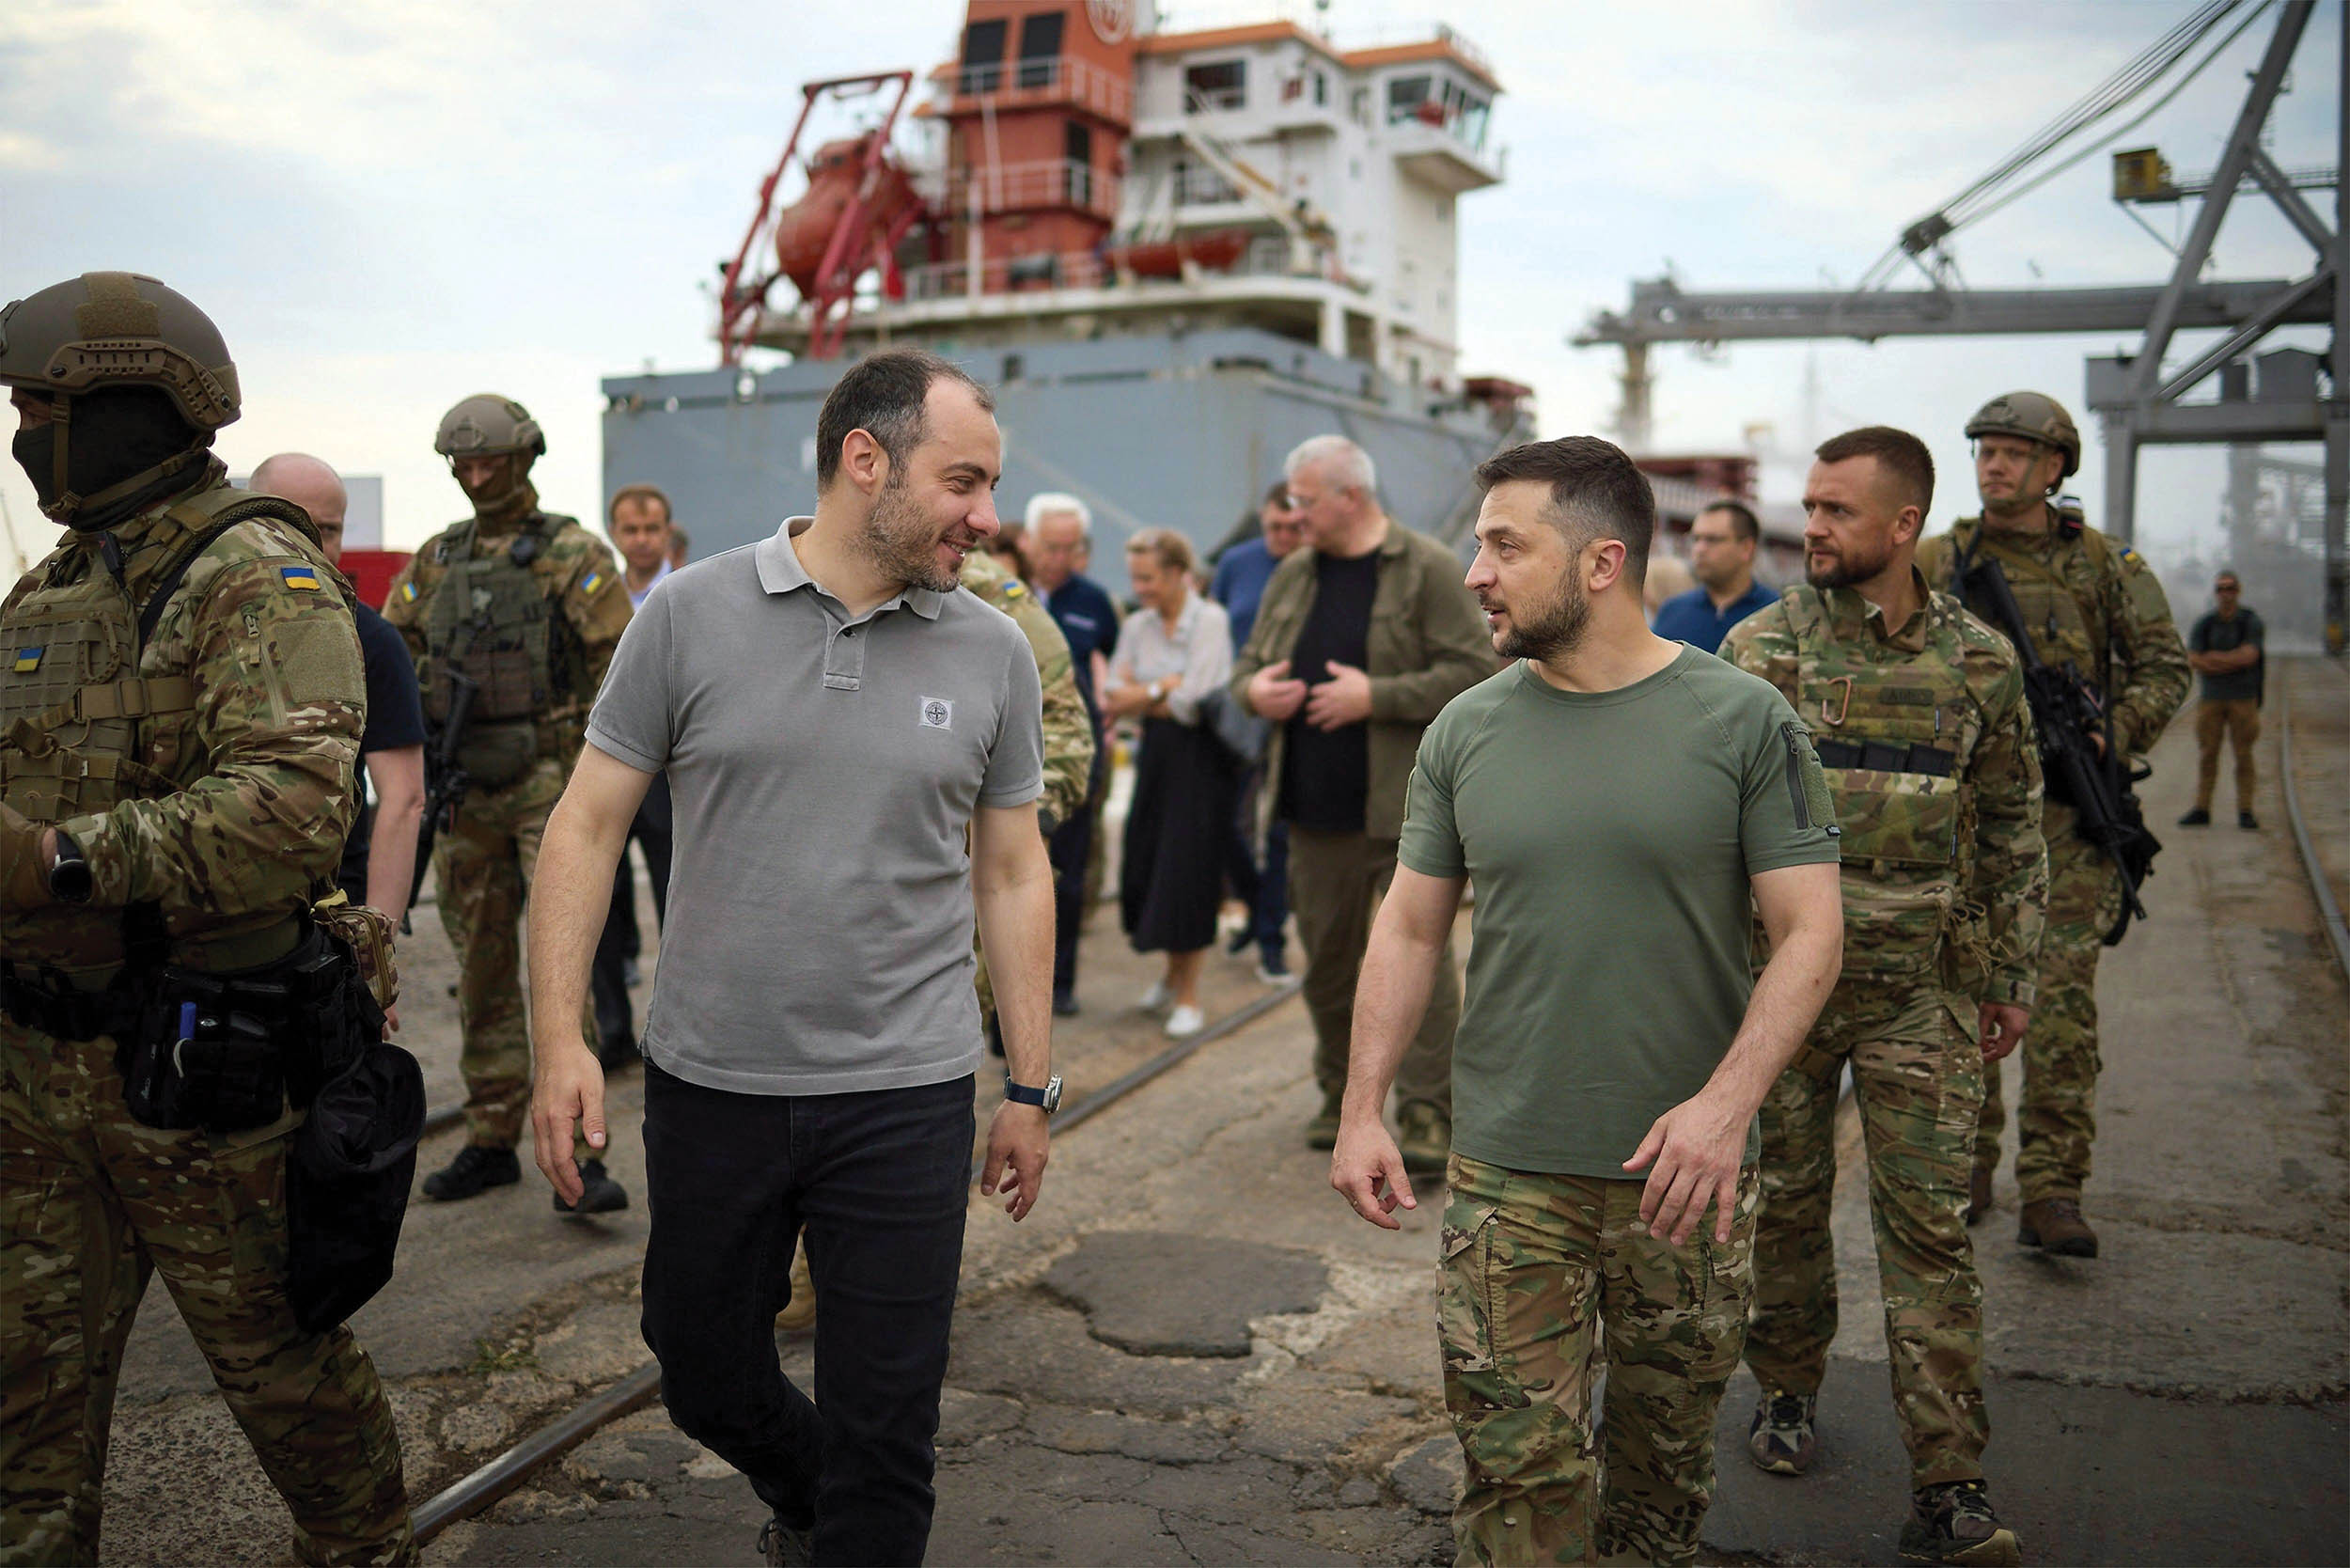 Ukrainian President Volodymyr Zelensky, right, walks with Minister of Infrastructure Oleksandr Kubrakov during visit to Chornomorsk Sea Trade Port to watch Turkish-flagged dry cargo ship Polarnet loaded with grain for export, July 29, 2022, in Chornomorsk, Odesa Oblast, Ukraine (Ukrainian Presidential Press Office/Ukraine Presidency/Alamy Live News)